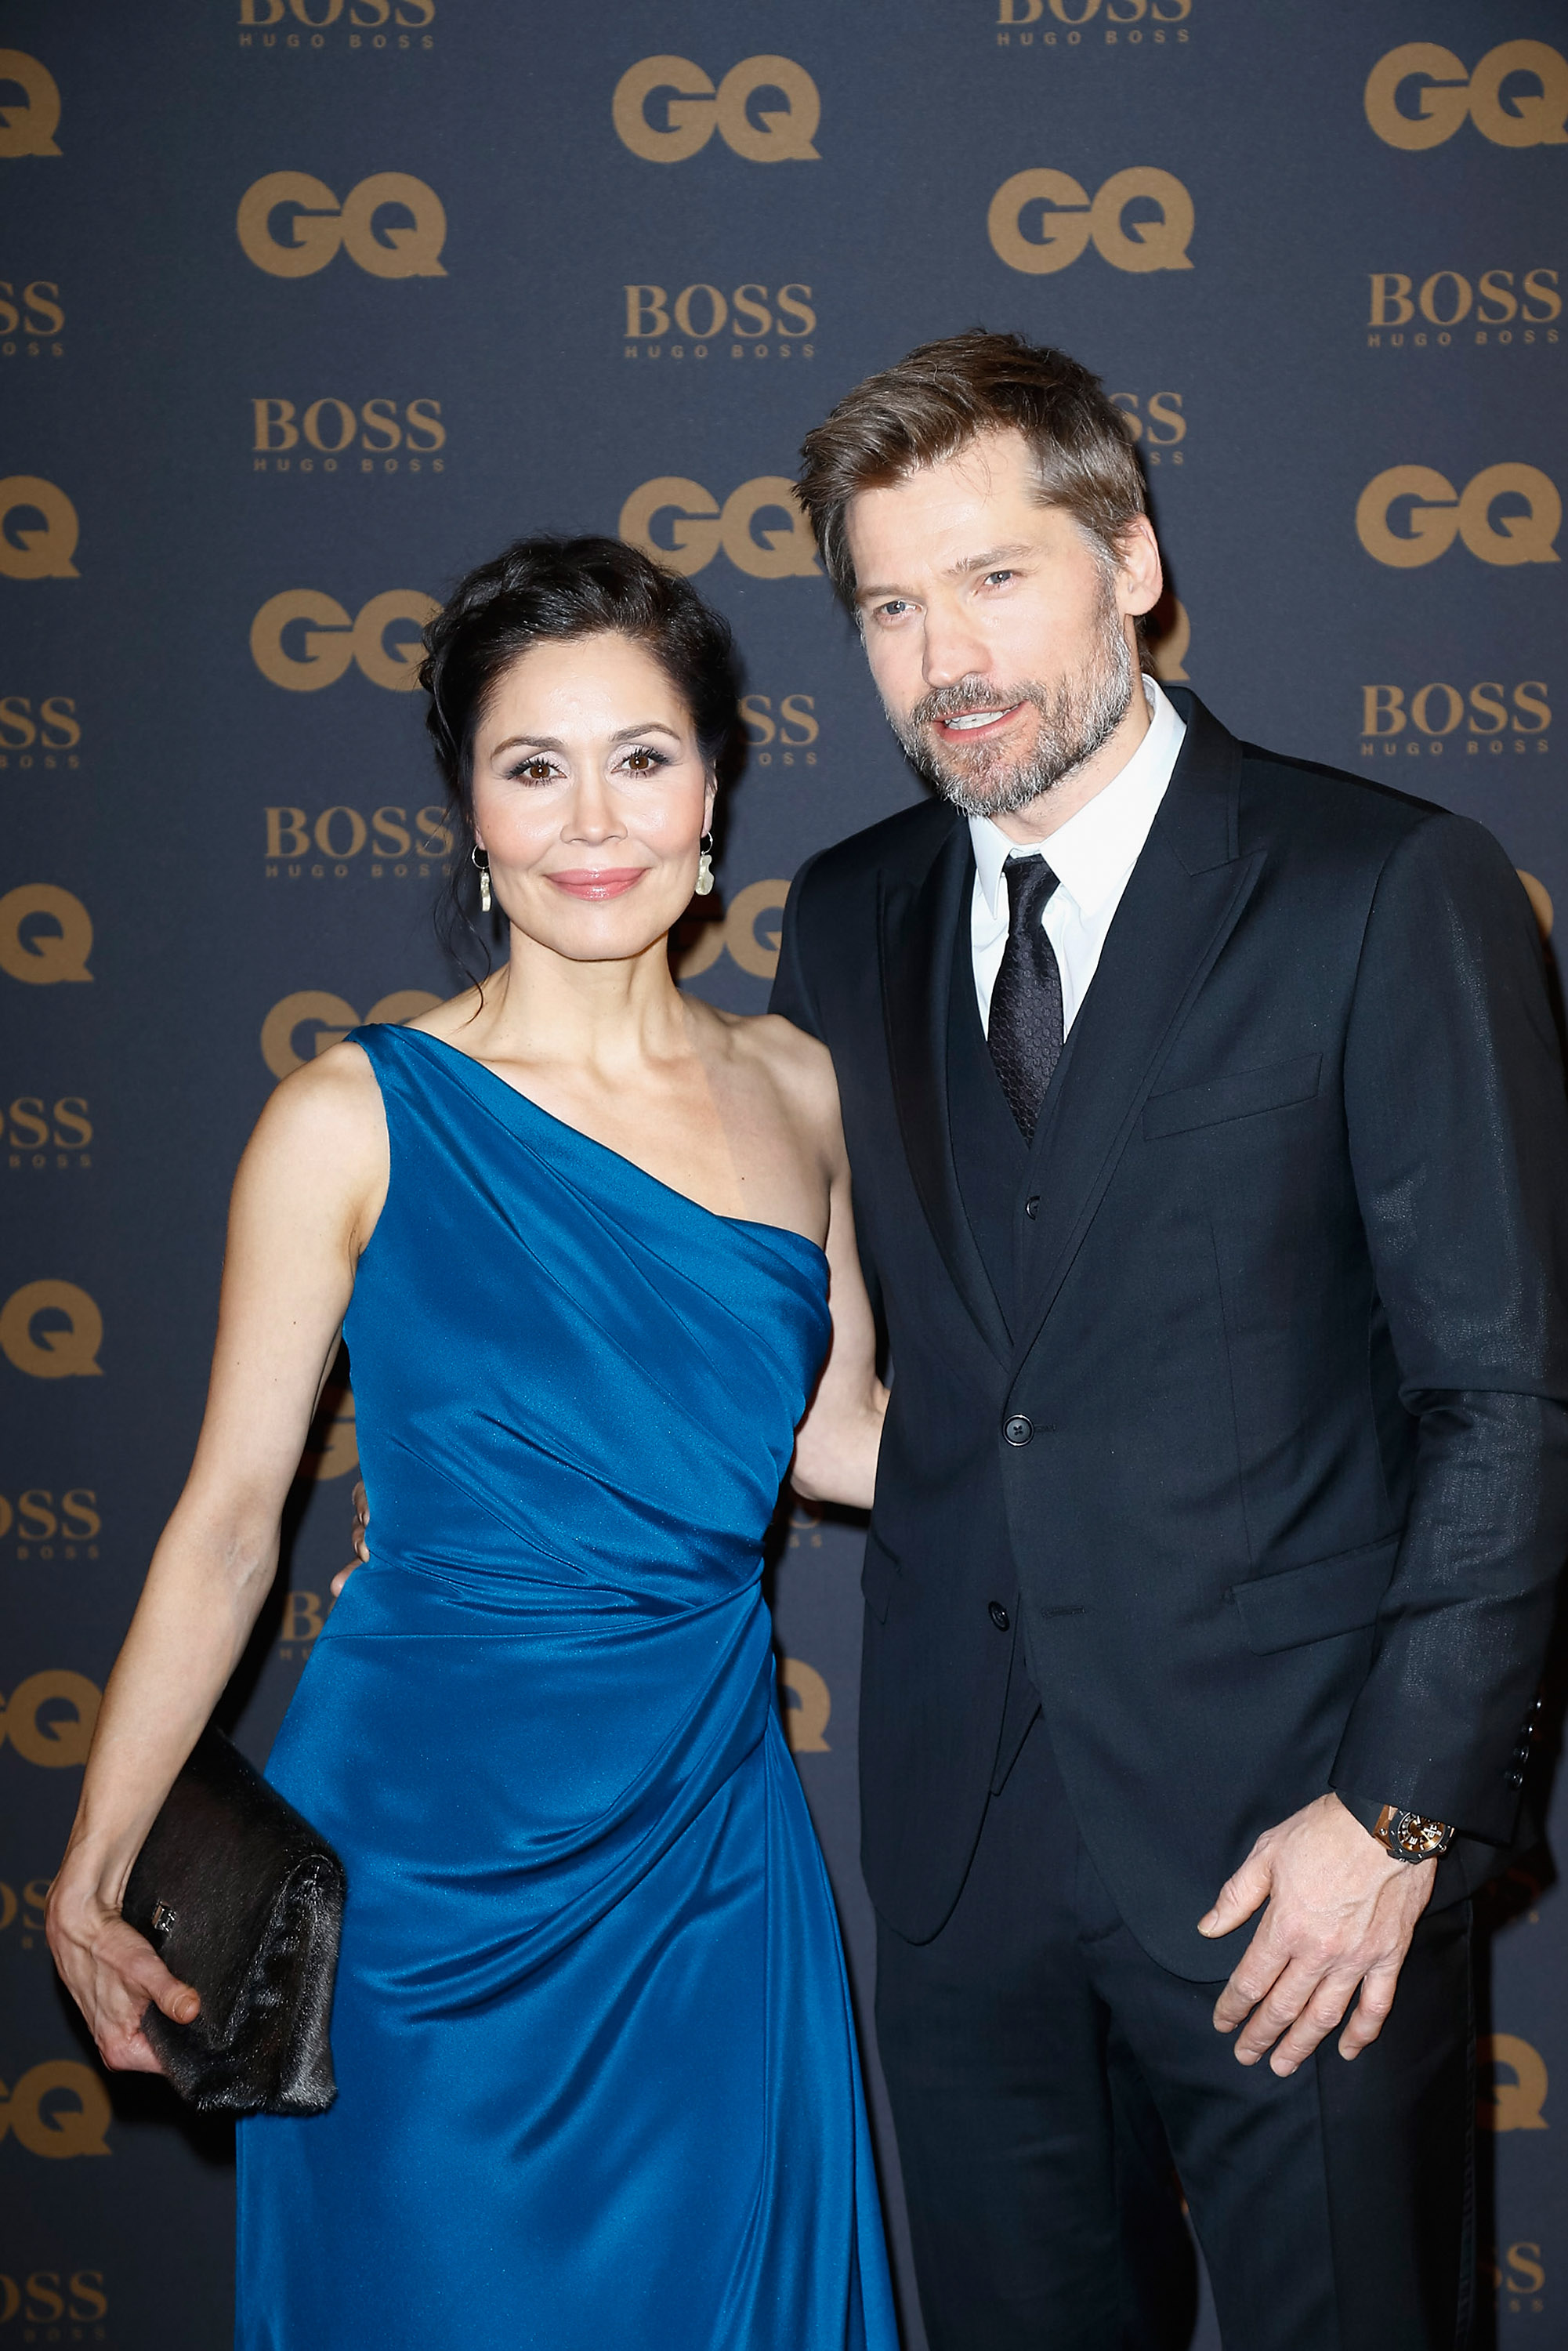 Nikolaj Coster-Waldau and his wife attend the GQ Men Of The Year Awards 2015 as part of Paris Fashion Week on January 25, 2016, Paris, France. | Source: Getty Images